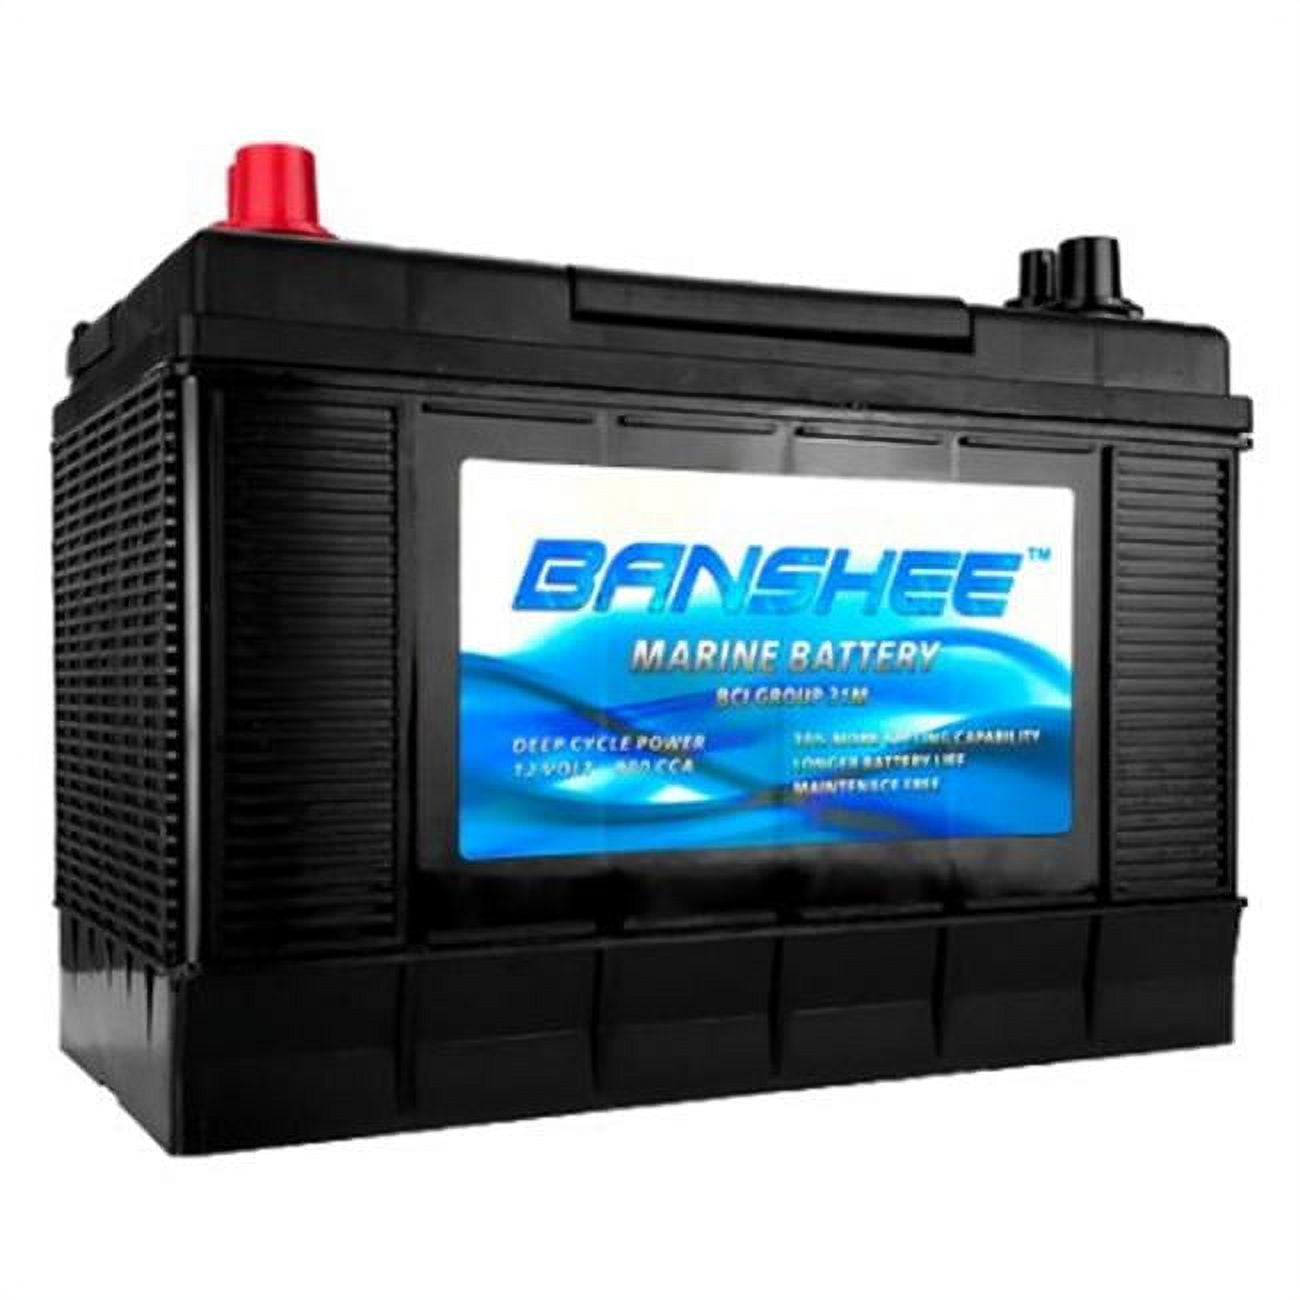 Picture of Banshee 31M-Banshee-5 Deep Cycle Marine Battery, Group Size 31, 900 CCA - D31M